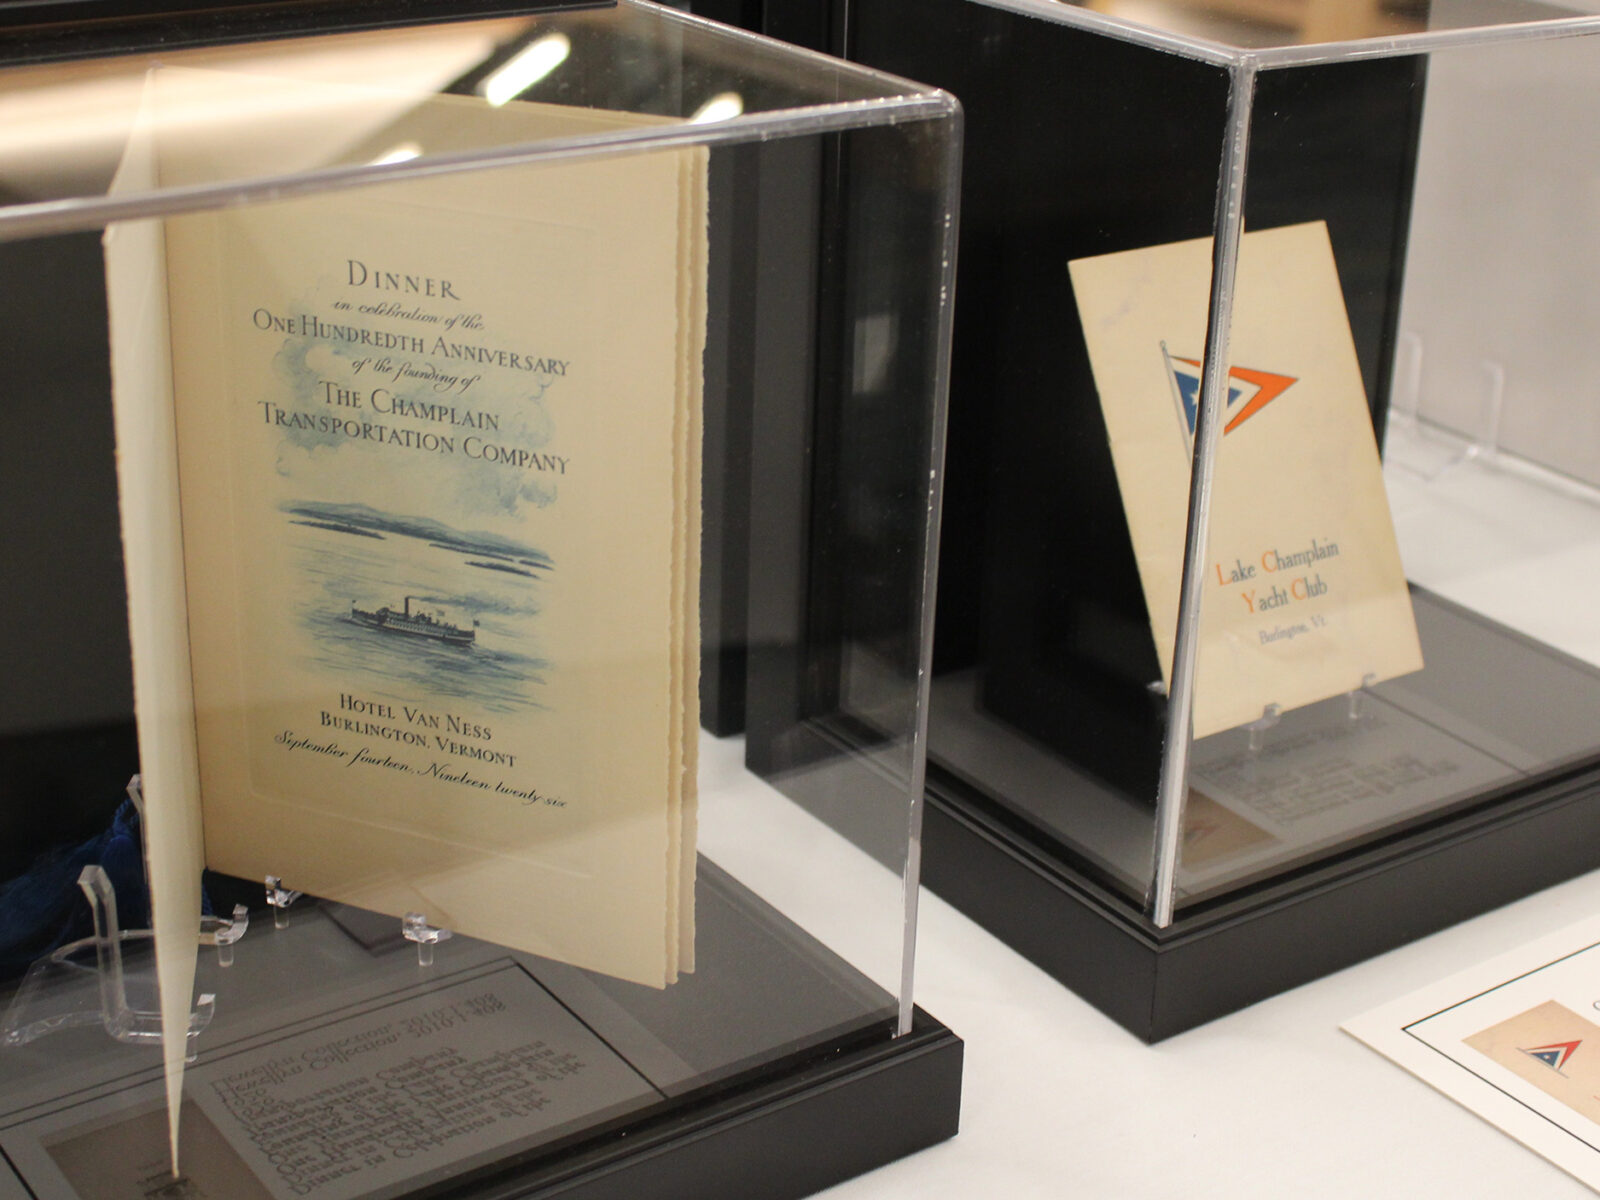 Menu for the 100th anniversary of the Champlain Transportation Company and pamphlet for the Lake Champlain Yacht club on stands under display glass.